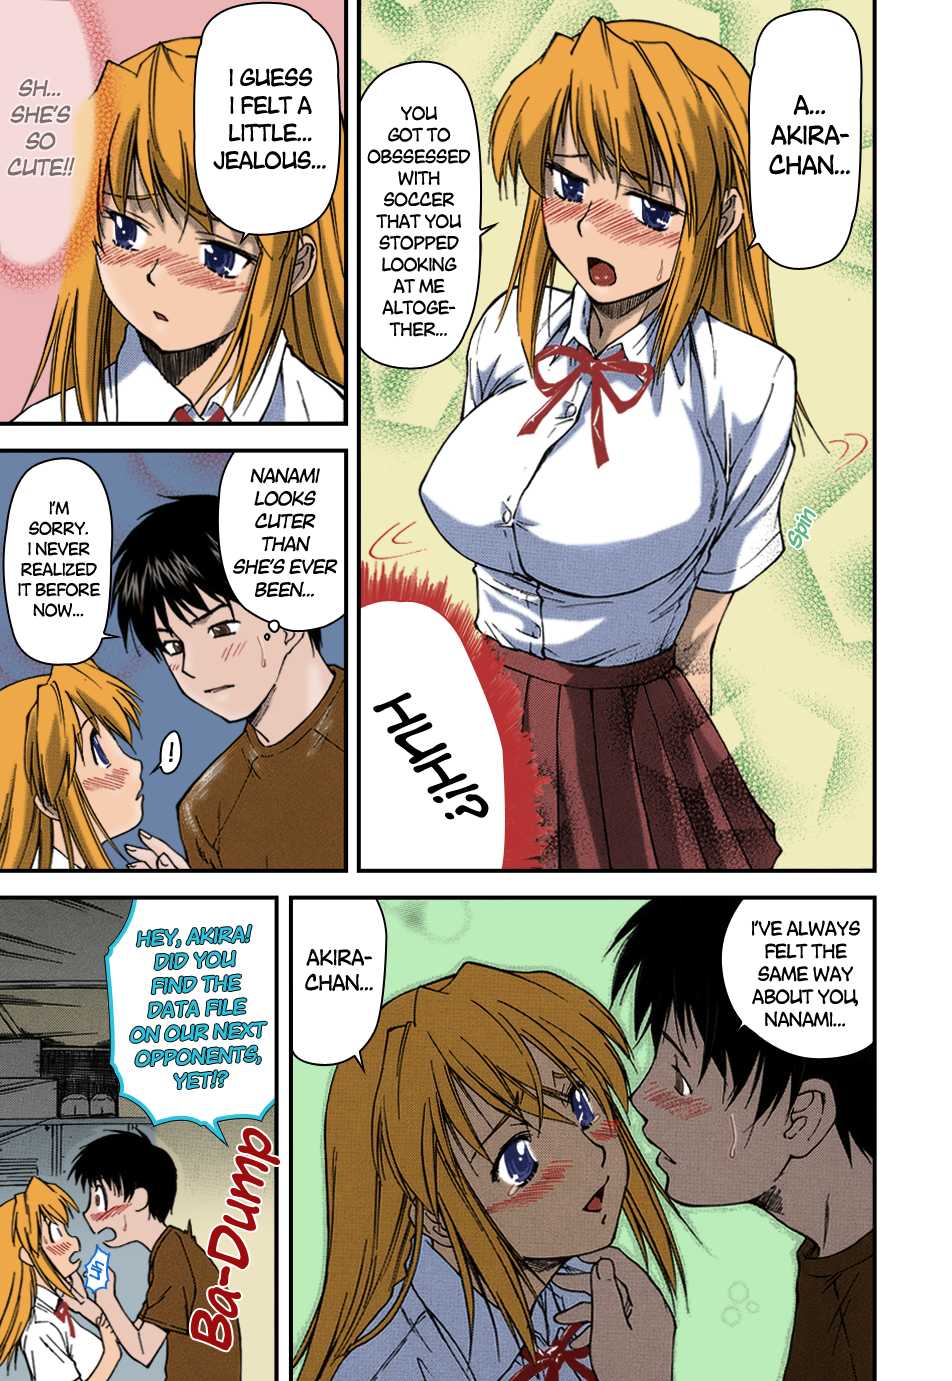 [Nagare Ippon] Offside Girl Ch. 1-4 [English] [Colorized] [Decensored] [WIP] - Page 15